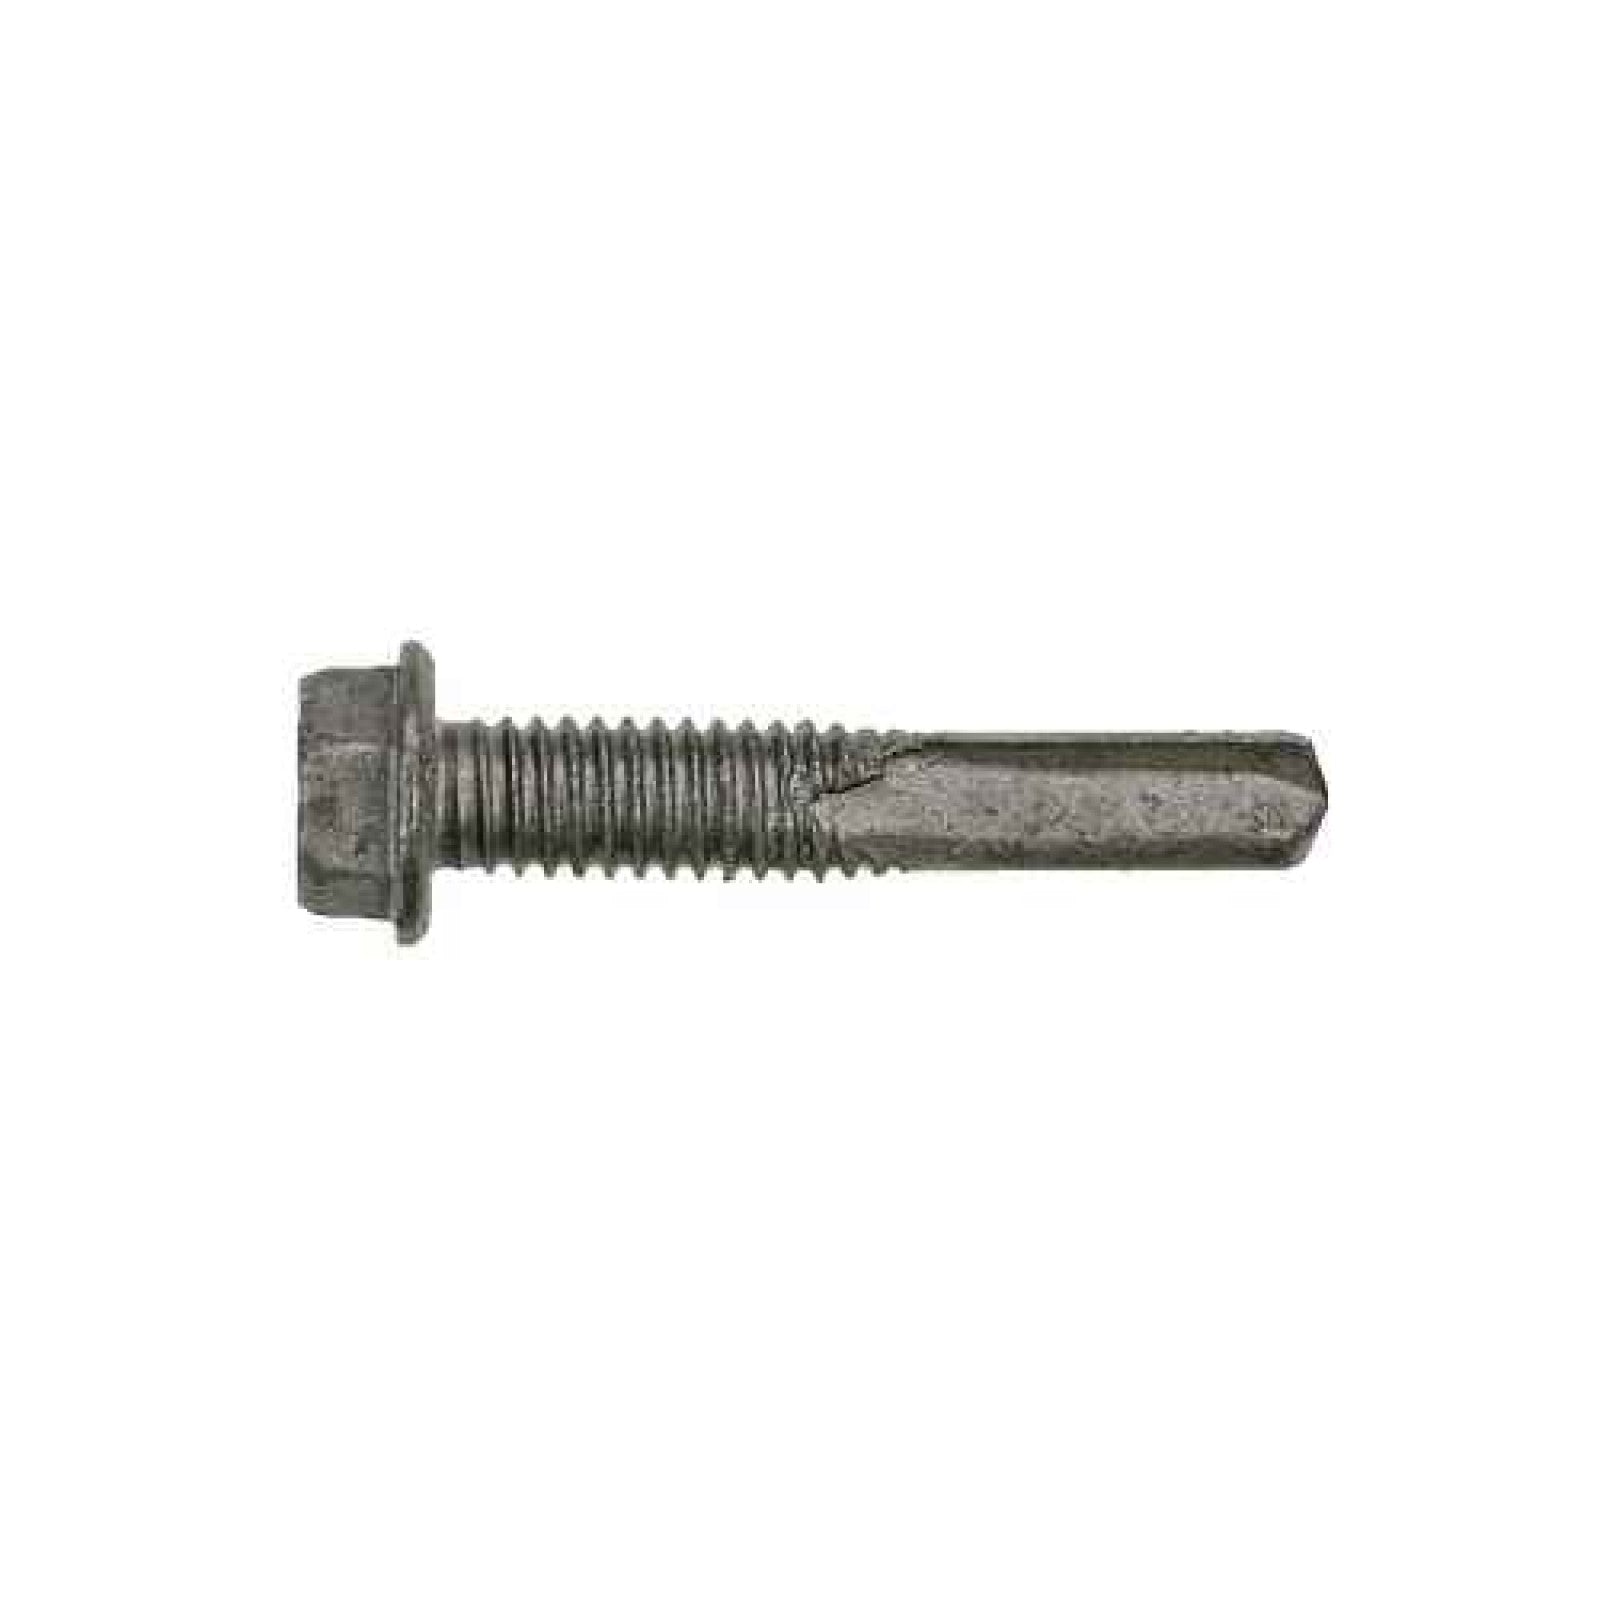 Simpson Strong-Tie XU34B1016-5K #10 x 3/4" Strong-Drive Self-Drilling Screw - Clear Zinc Coating - Pkg 5,000